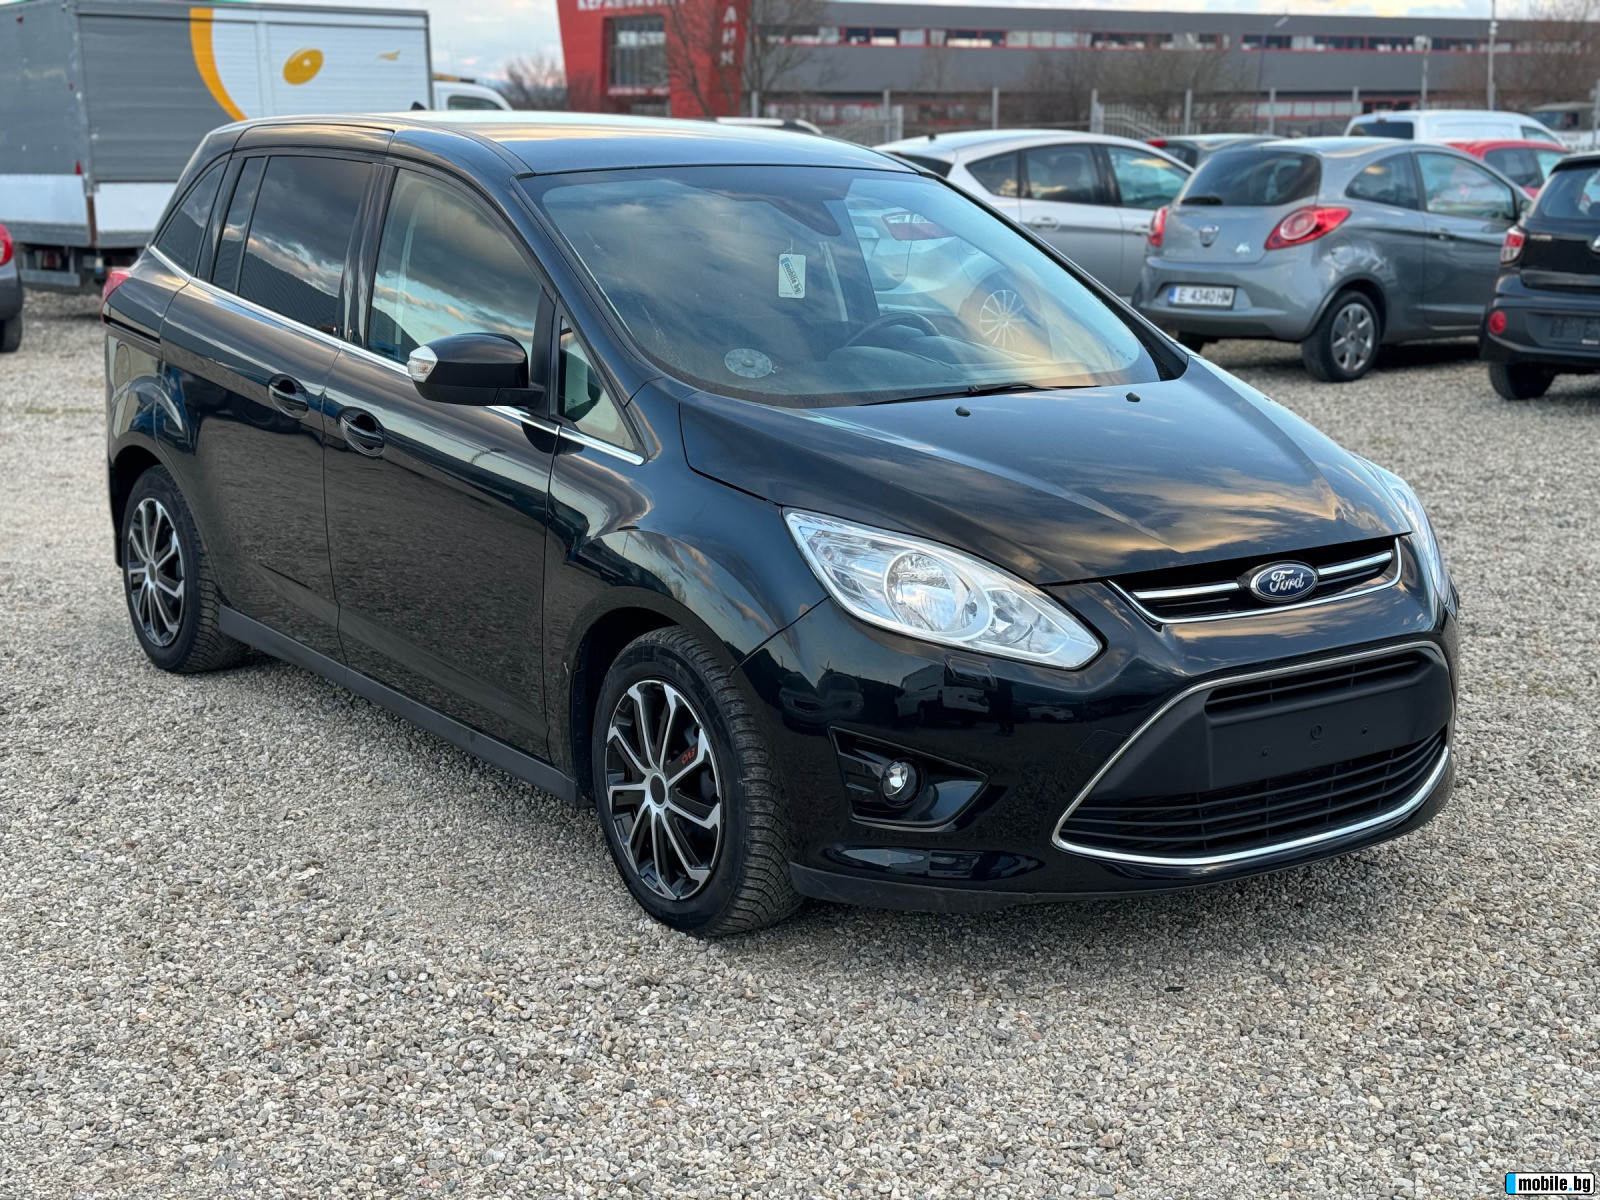 Ford Grand C-Max 2.0tdci Automatic 140hp | Mobile.bg   3